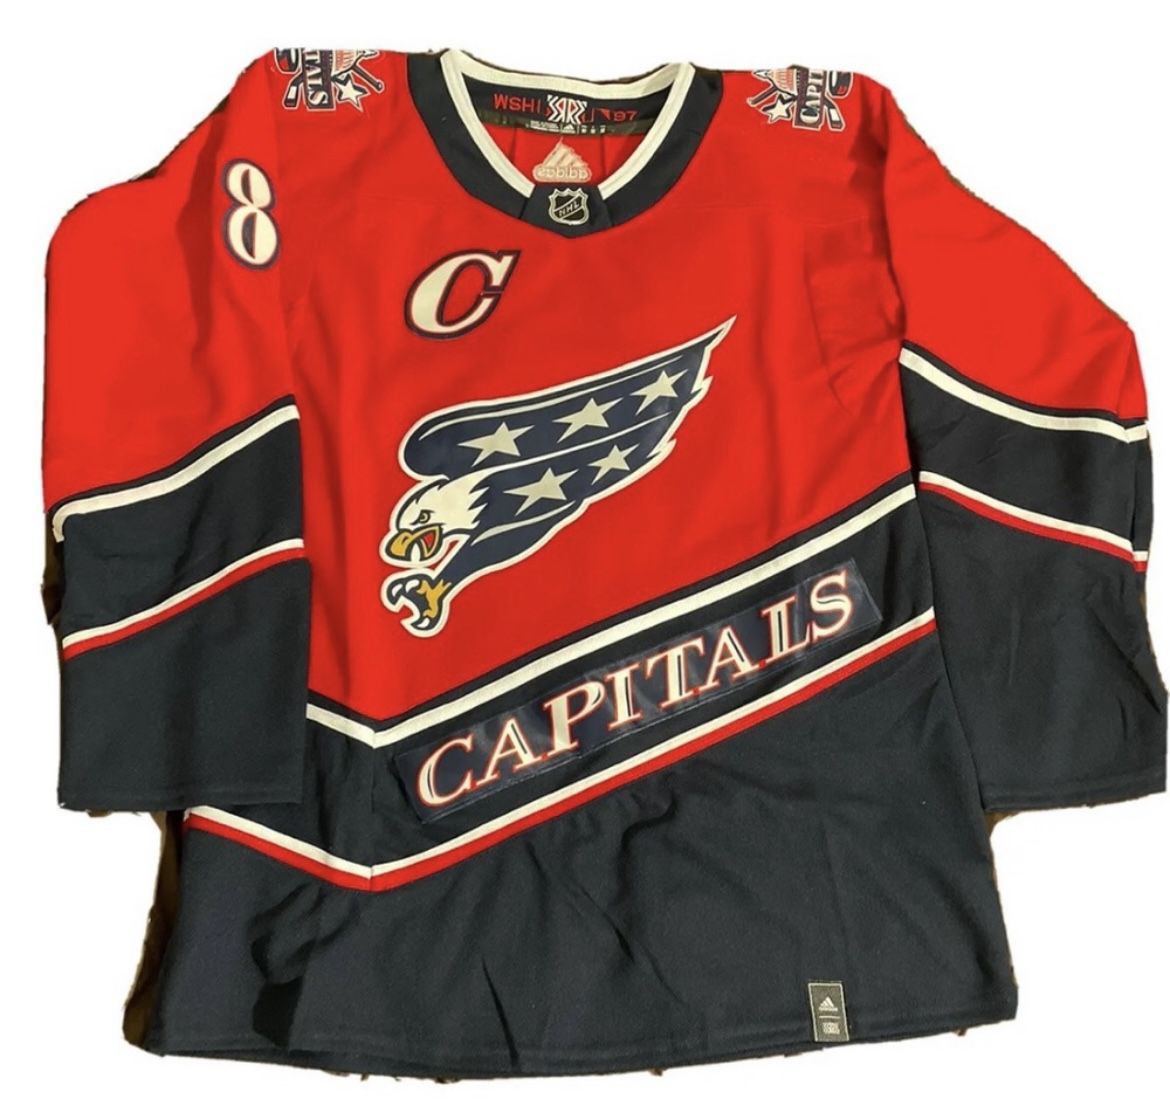 New Alex Ovechkin Washington Capitals Jersey Red Size L 52 Large, 50 M Medium, or 46 Small  With Tags